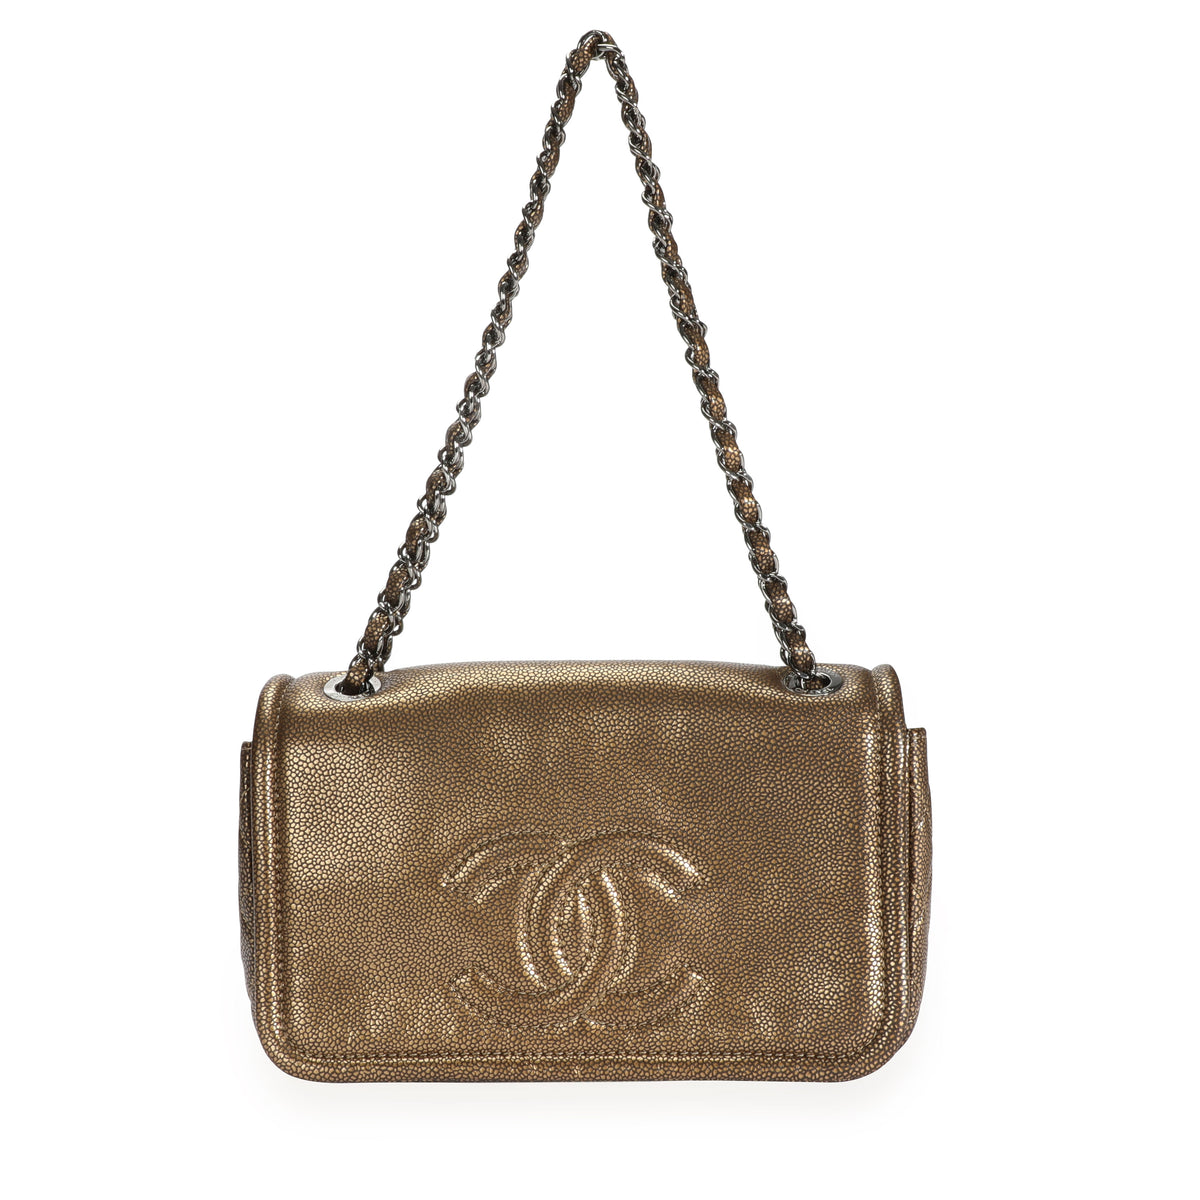 Chanel Bronze Pebbled Effect Leather Timeless Single Flap Bag